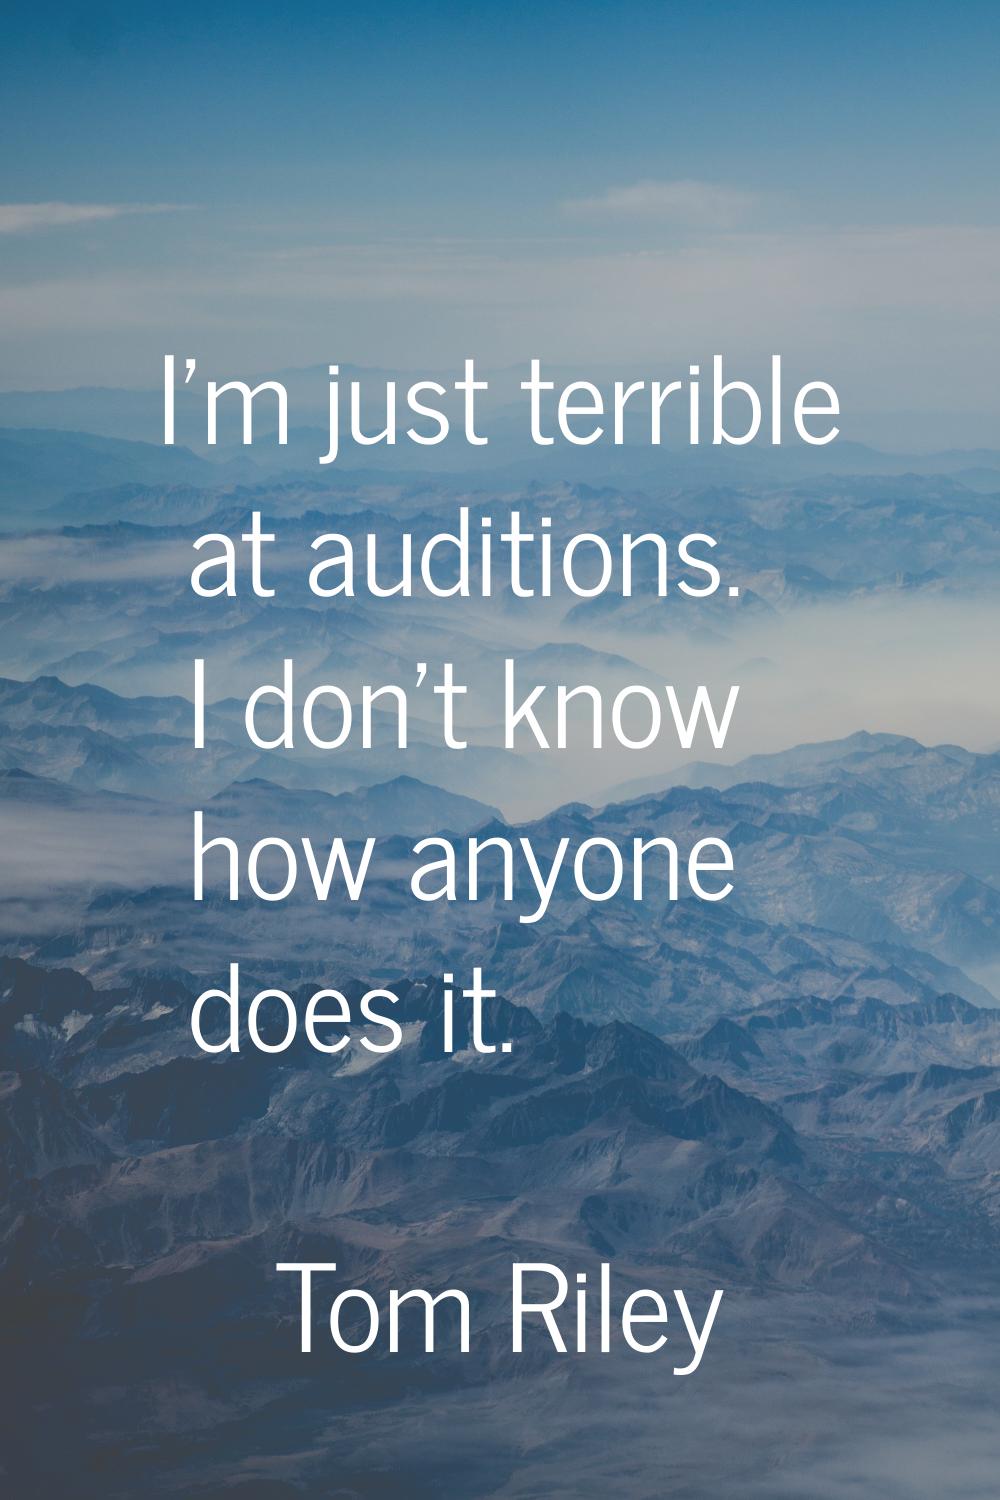 I'm just terrible at auditions. I don't know how anyone does it.